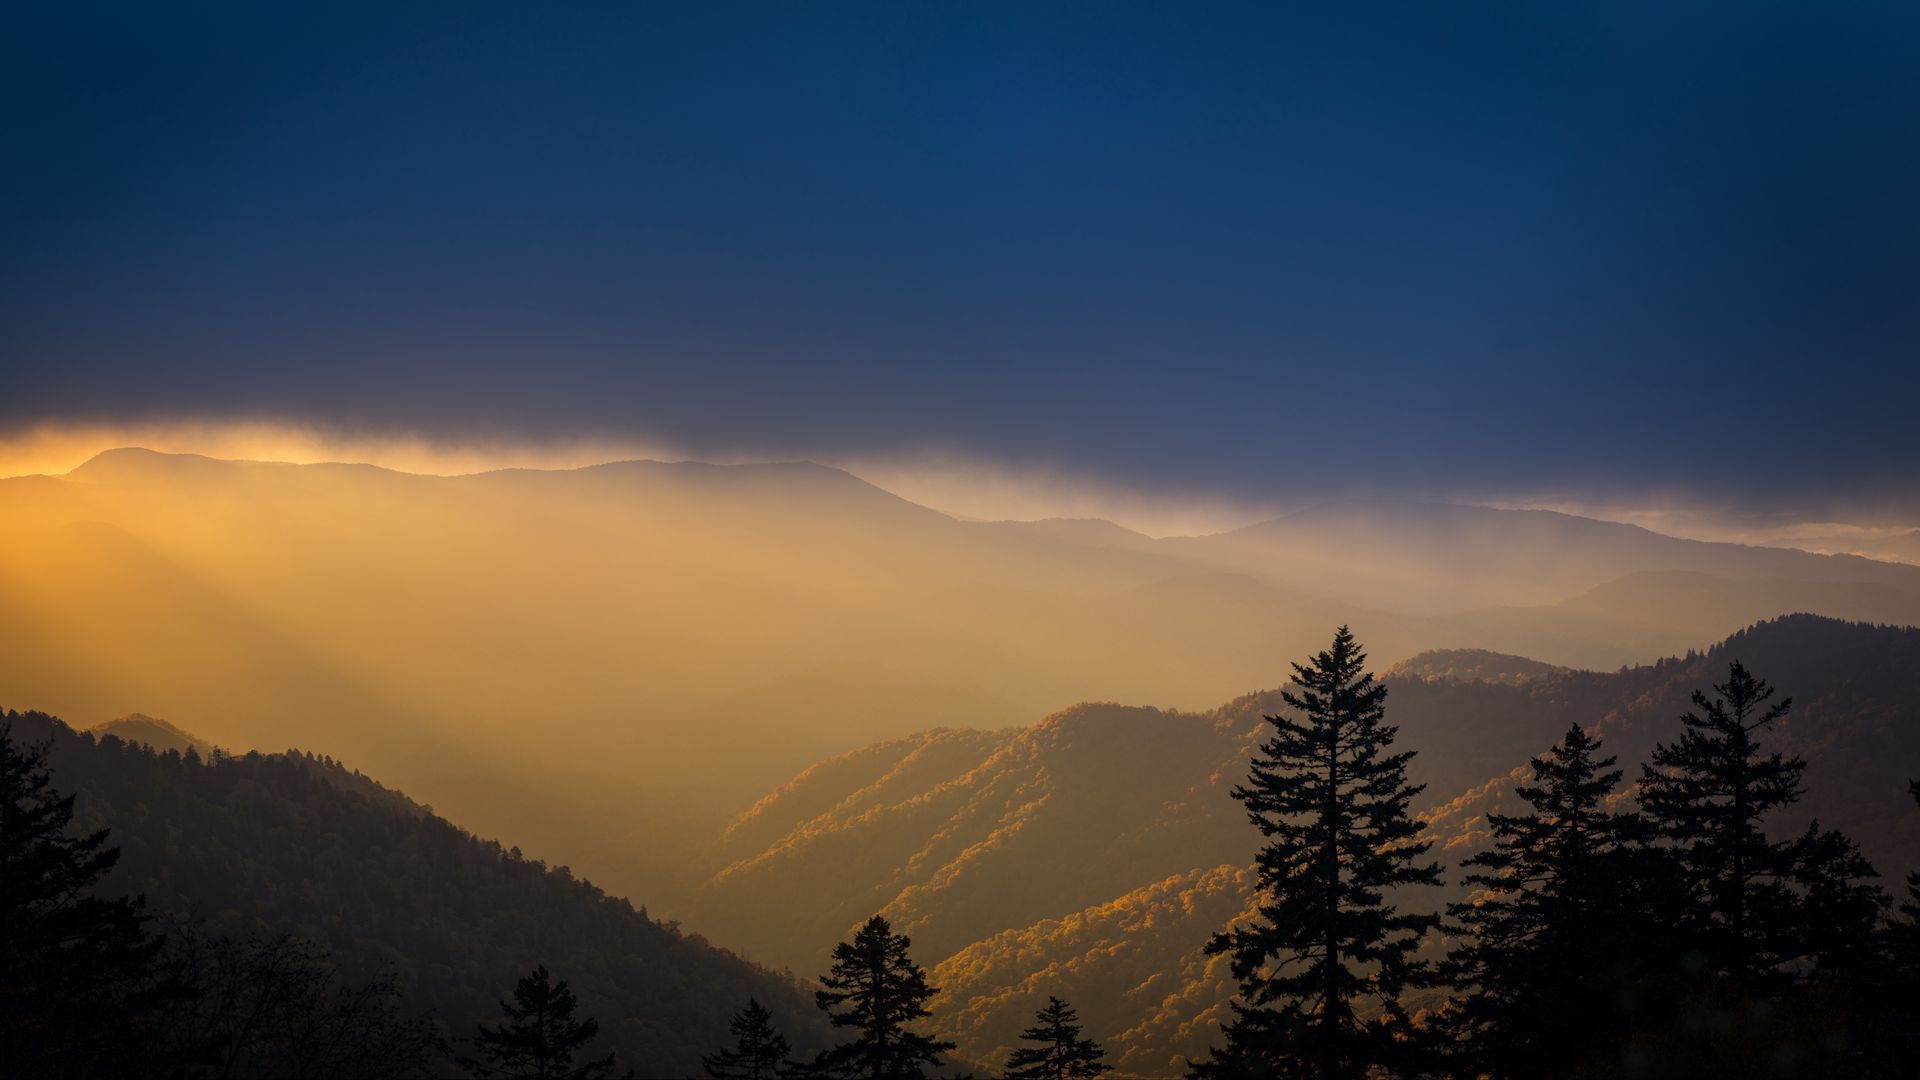 Download wallpaper 1920x1080 mountains, trees, fog, clouds, tops full ...